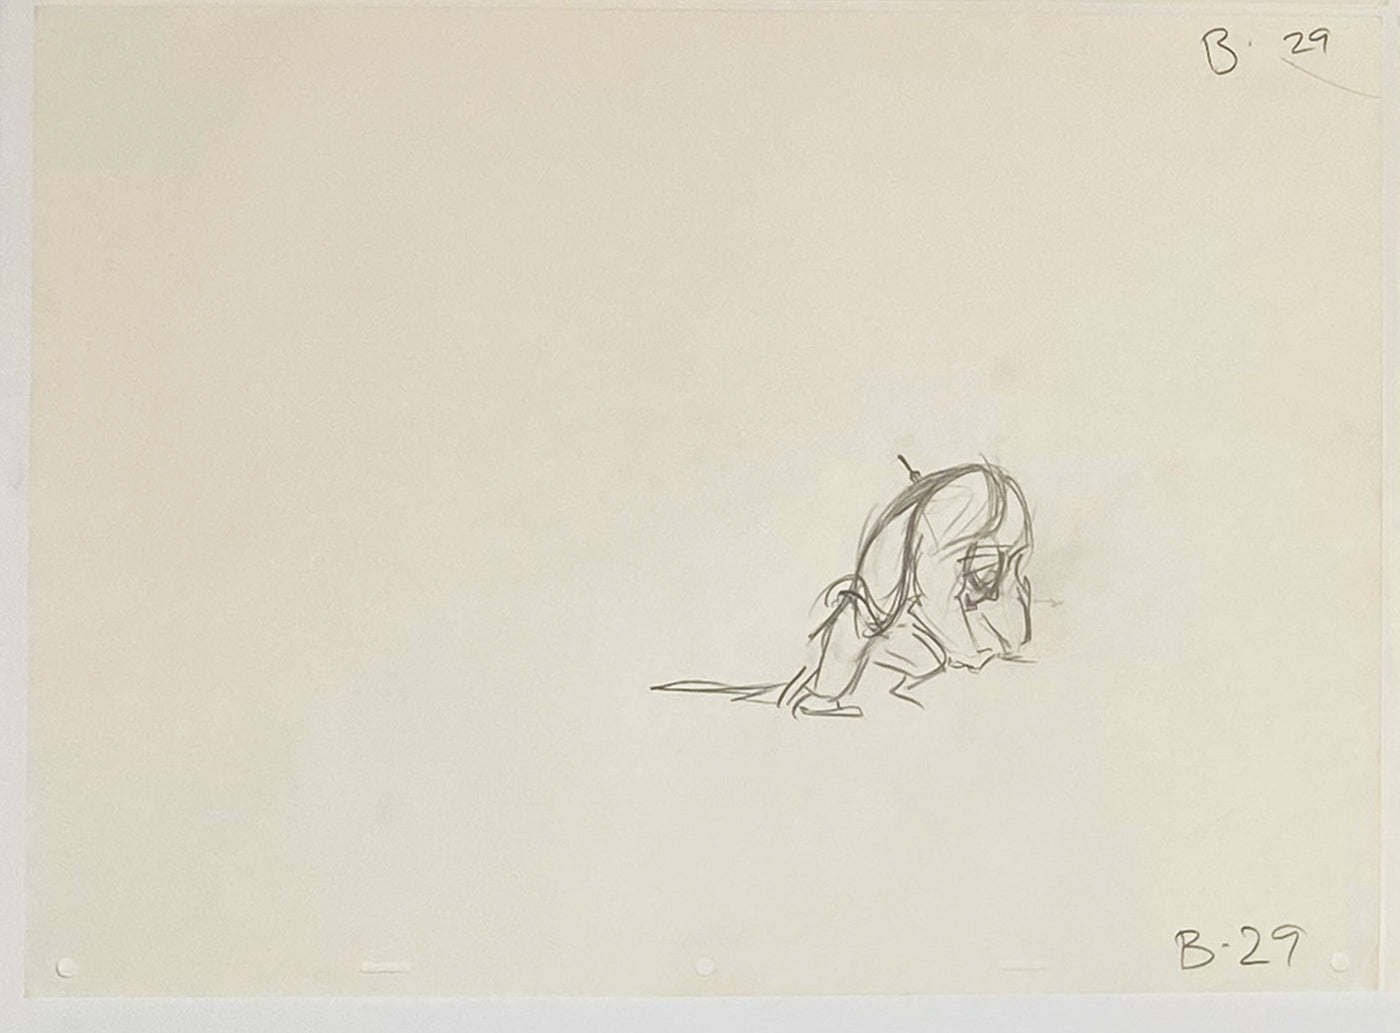 Original Walt Disney Sequence of 8 Production Drawings from Beauty and the Beast featuring Beast